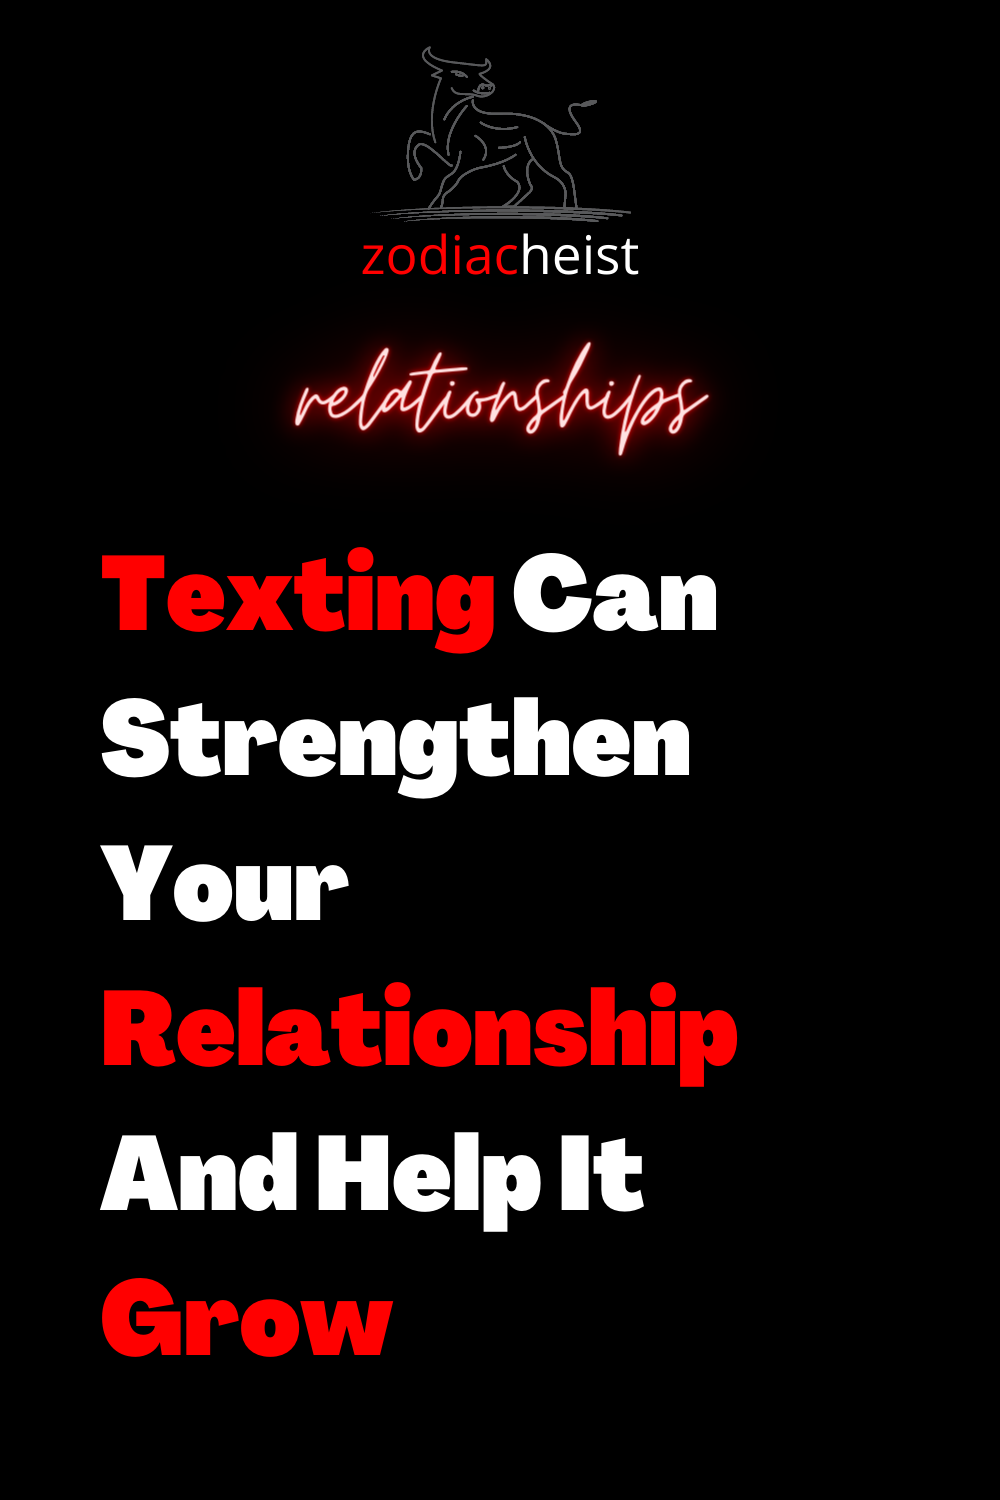 Texting Can Strengthen Your Relationship And Help It Grow